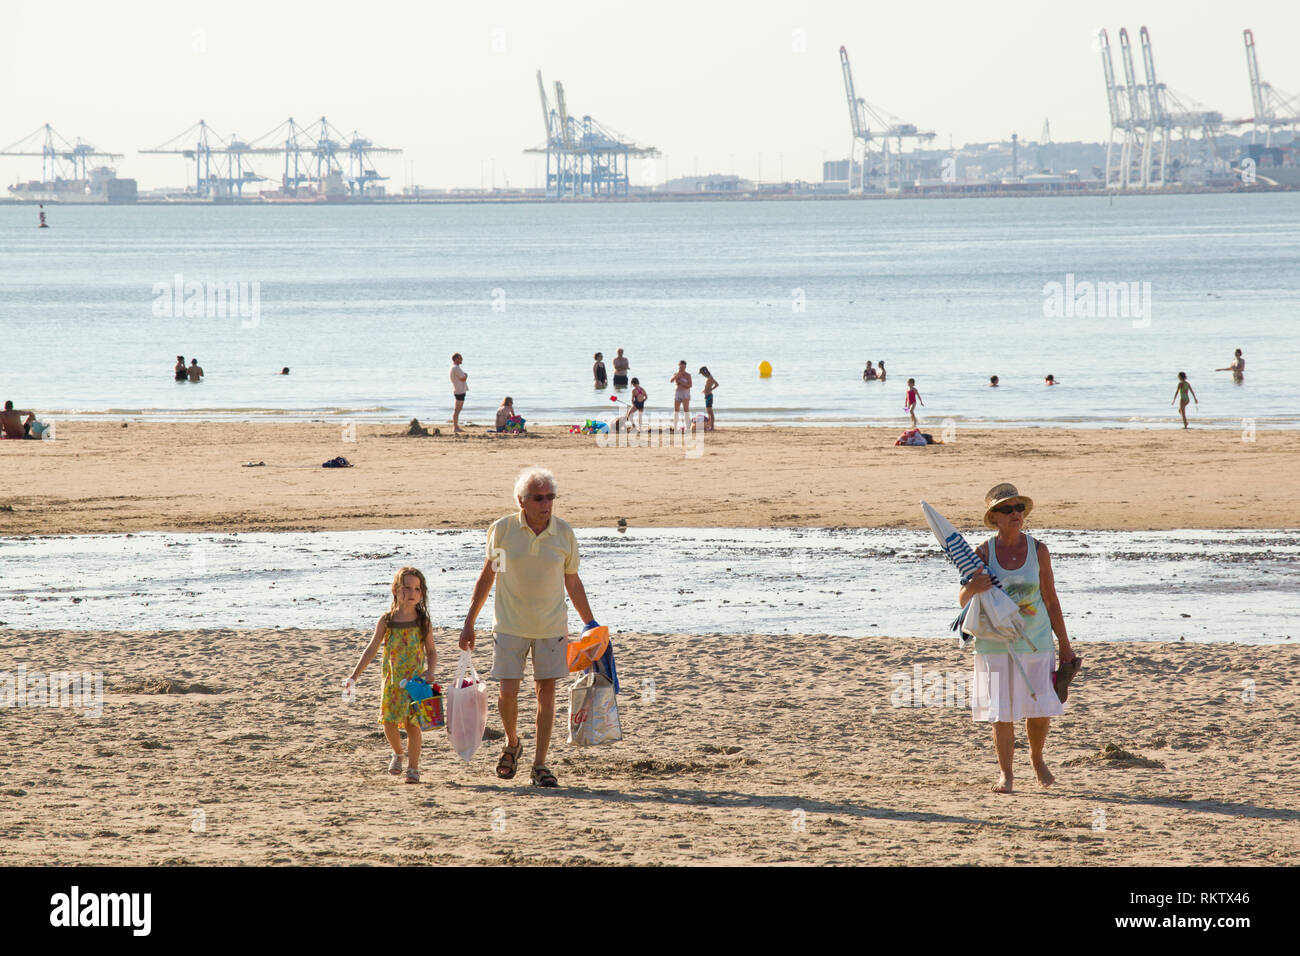 Holidaymakers enjoy the Summer sun on the beach at Plage de Butin, Honfleur, France with the gantry cranes of container port of Le Havre across the Se Stock Photo